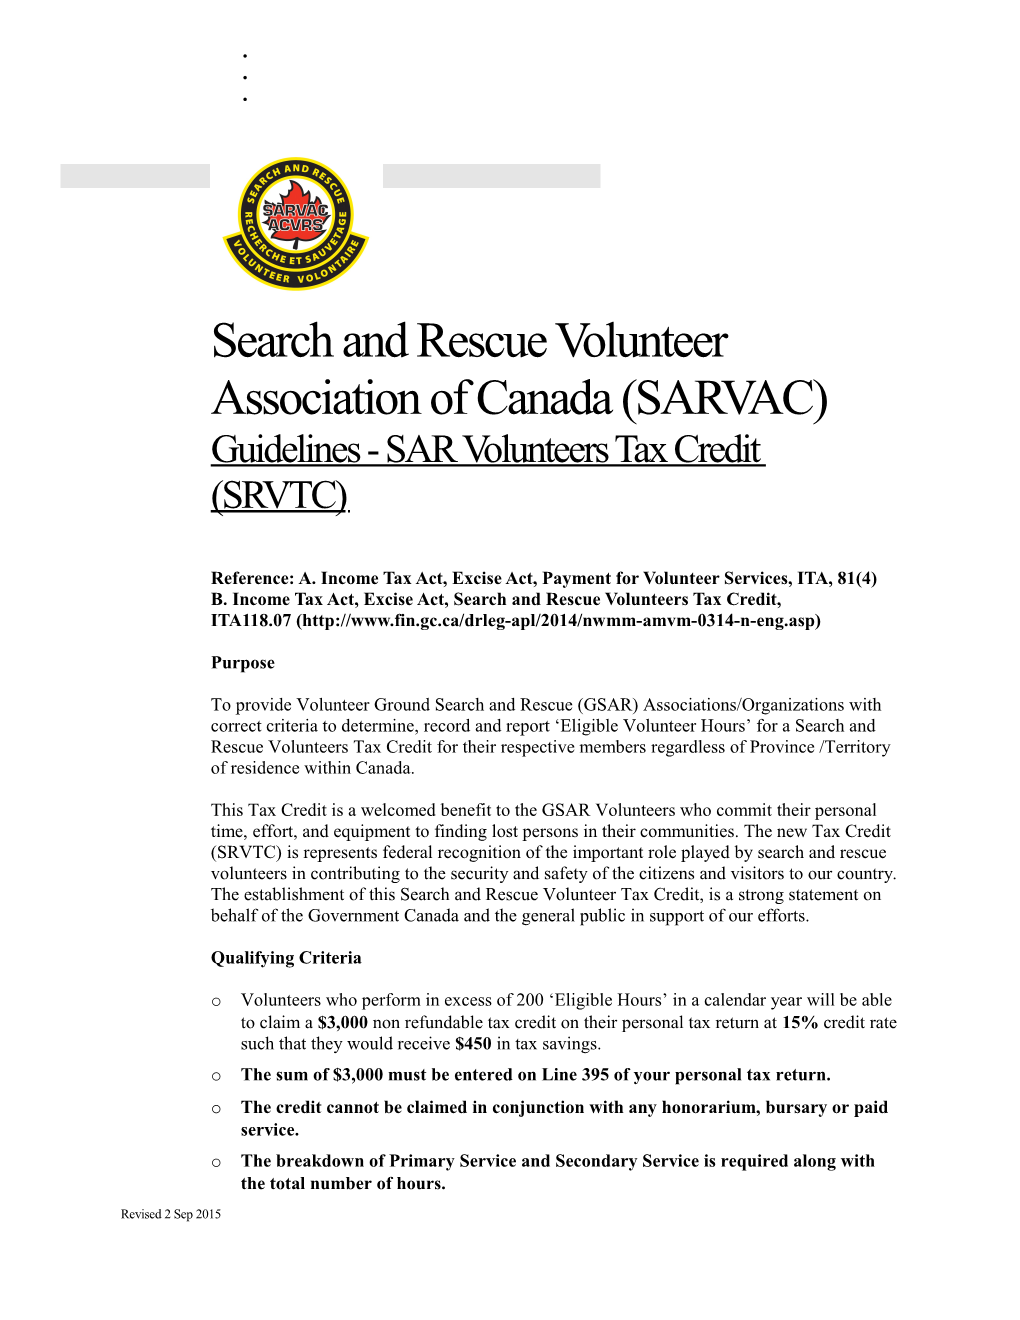 Reference: A. Income Tax Act, Excise Act, Payment for Volunteer Services, ITA, 81(4)